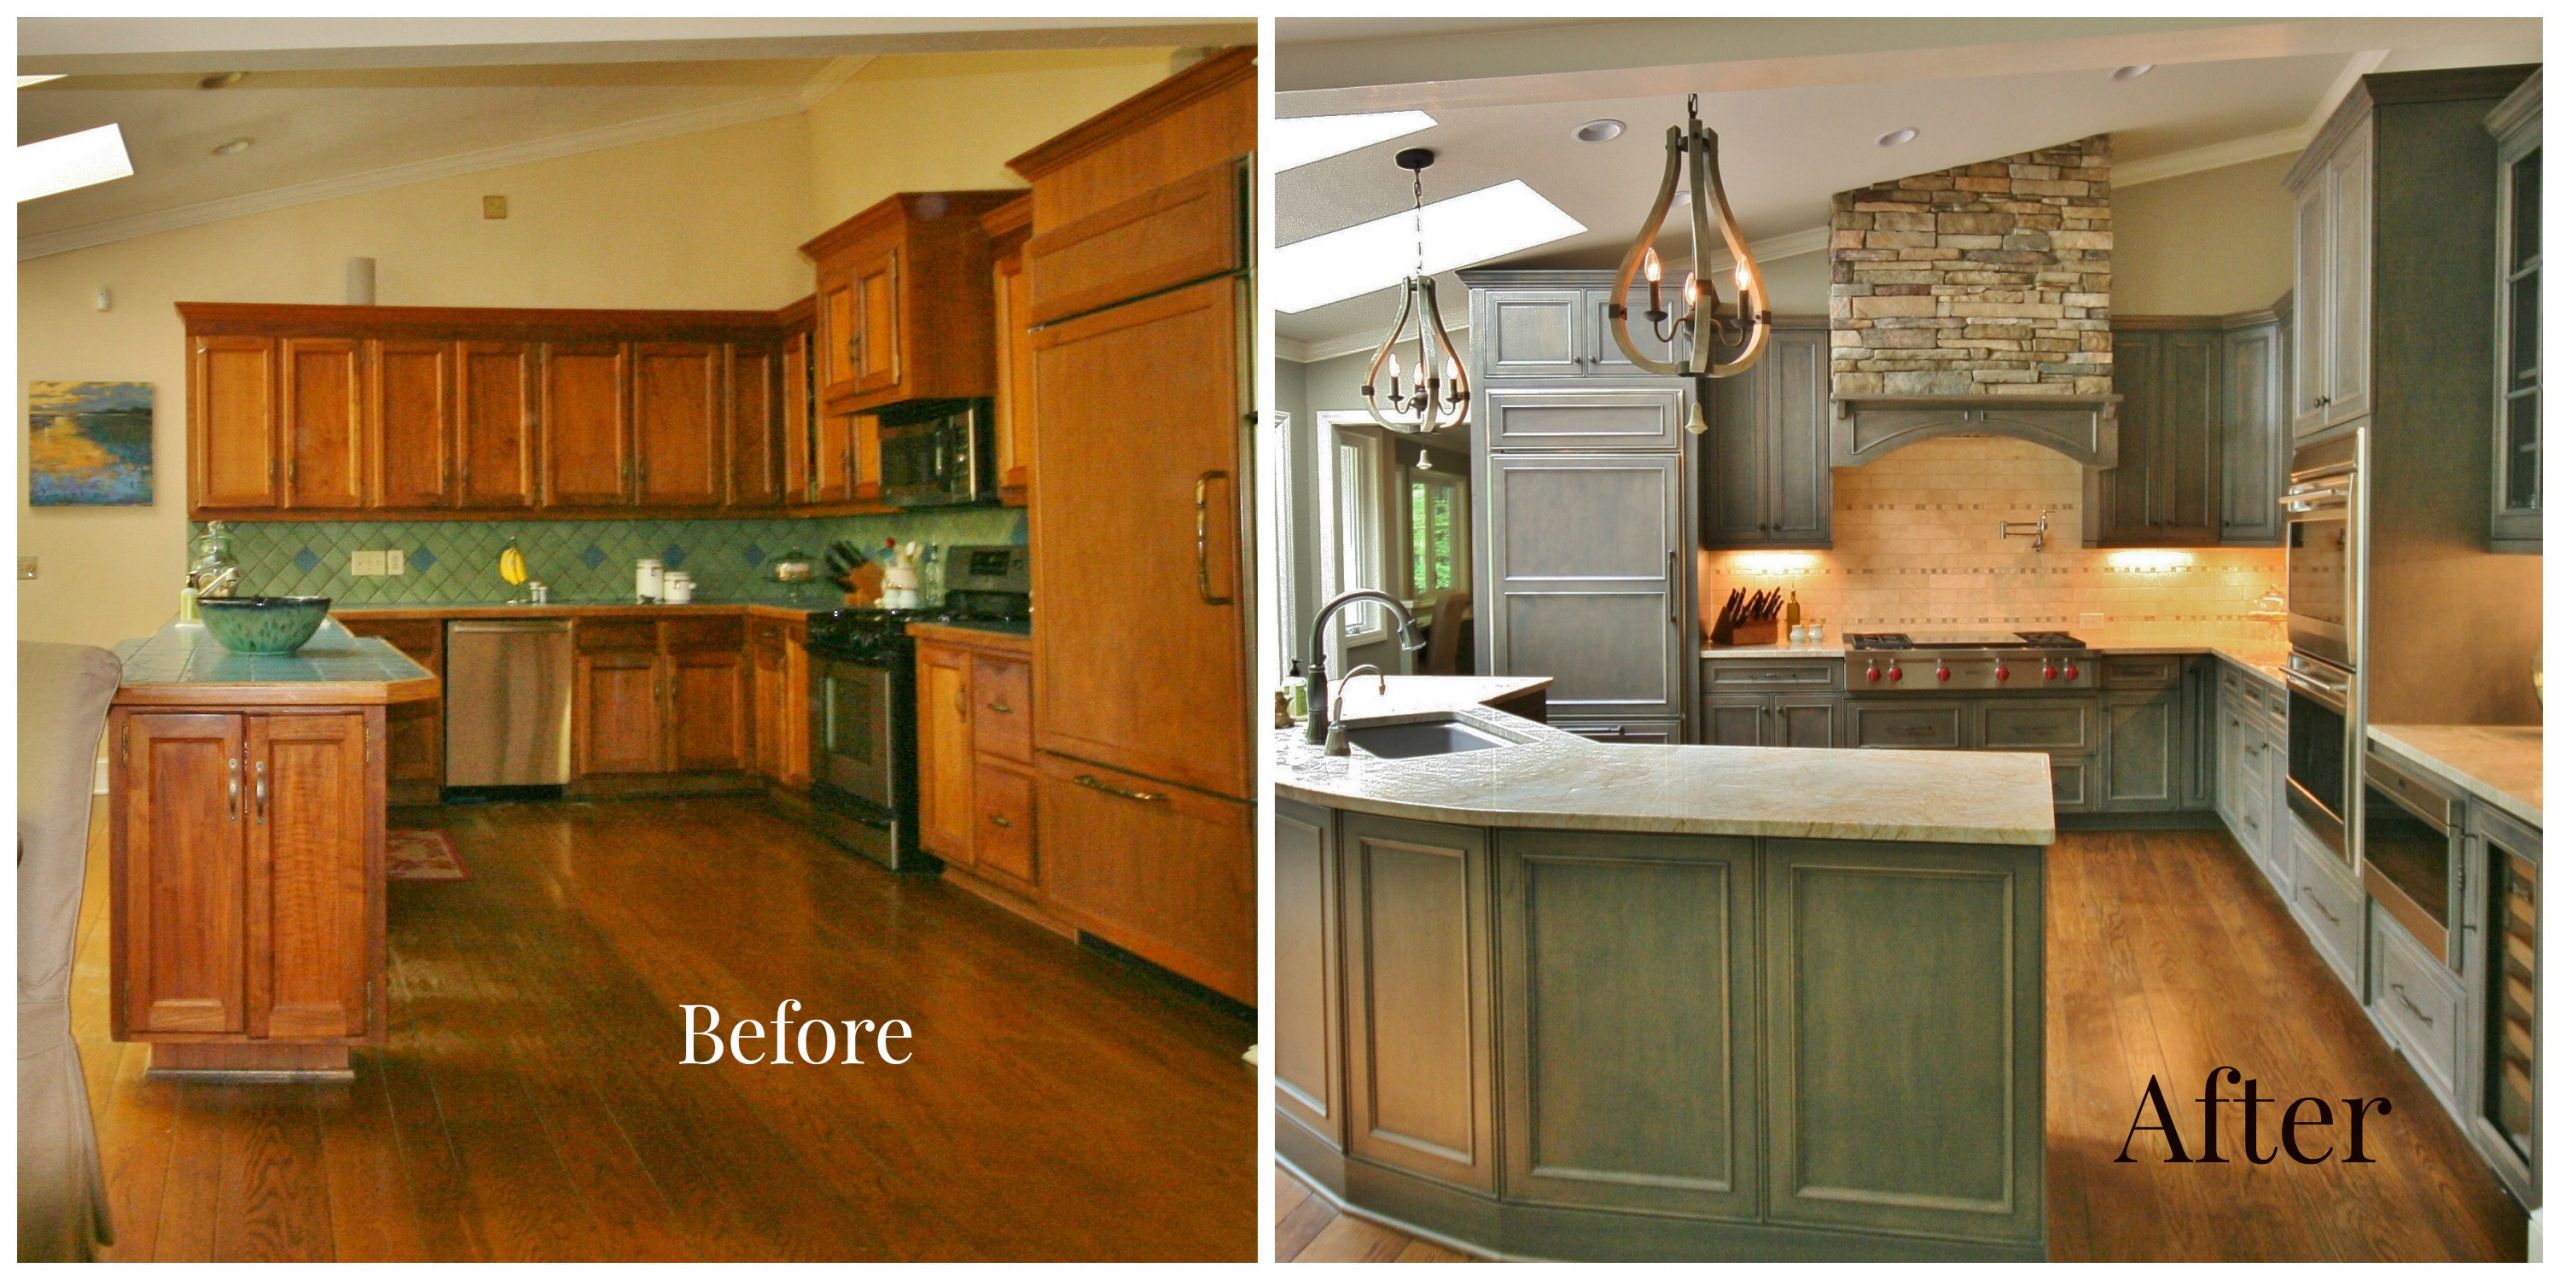 Kitchen Remodel Before And After
 Get the Fresh and Cool Outlook Inspiration with Kitchen